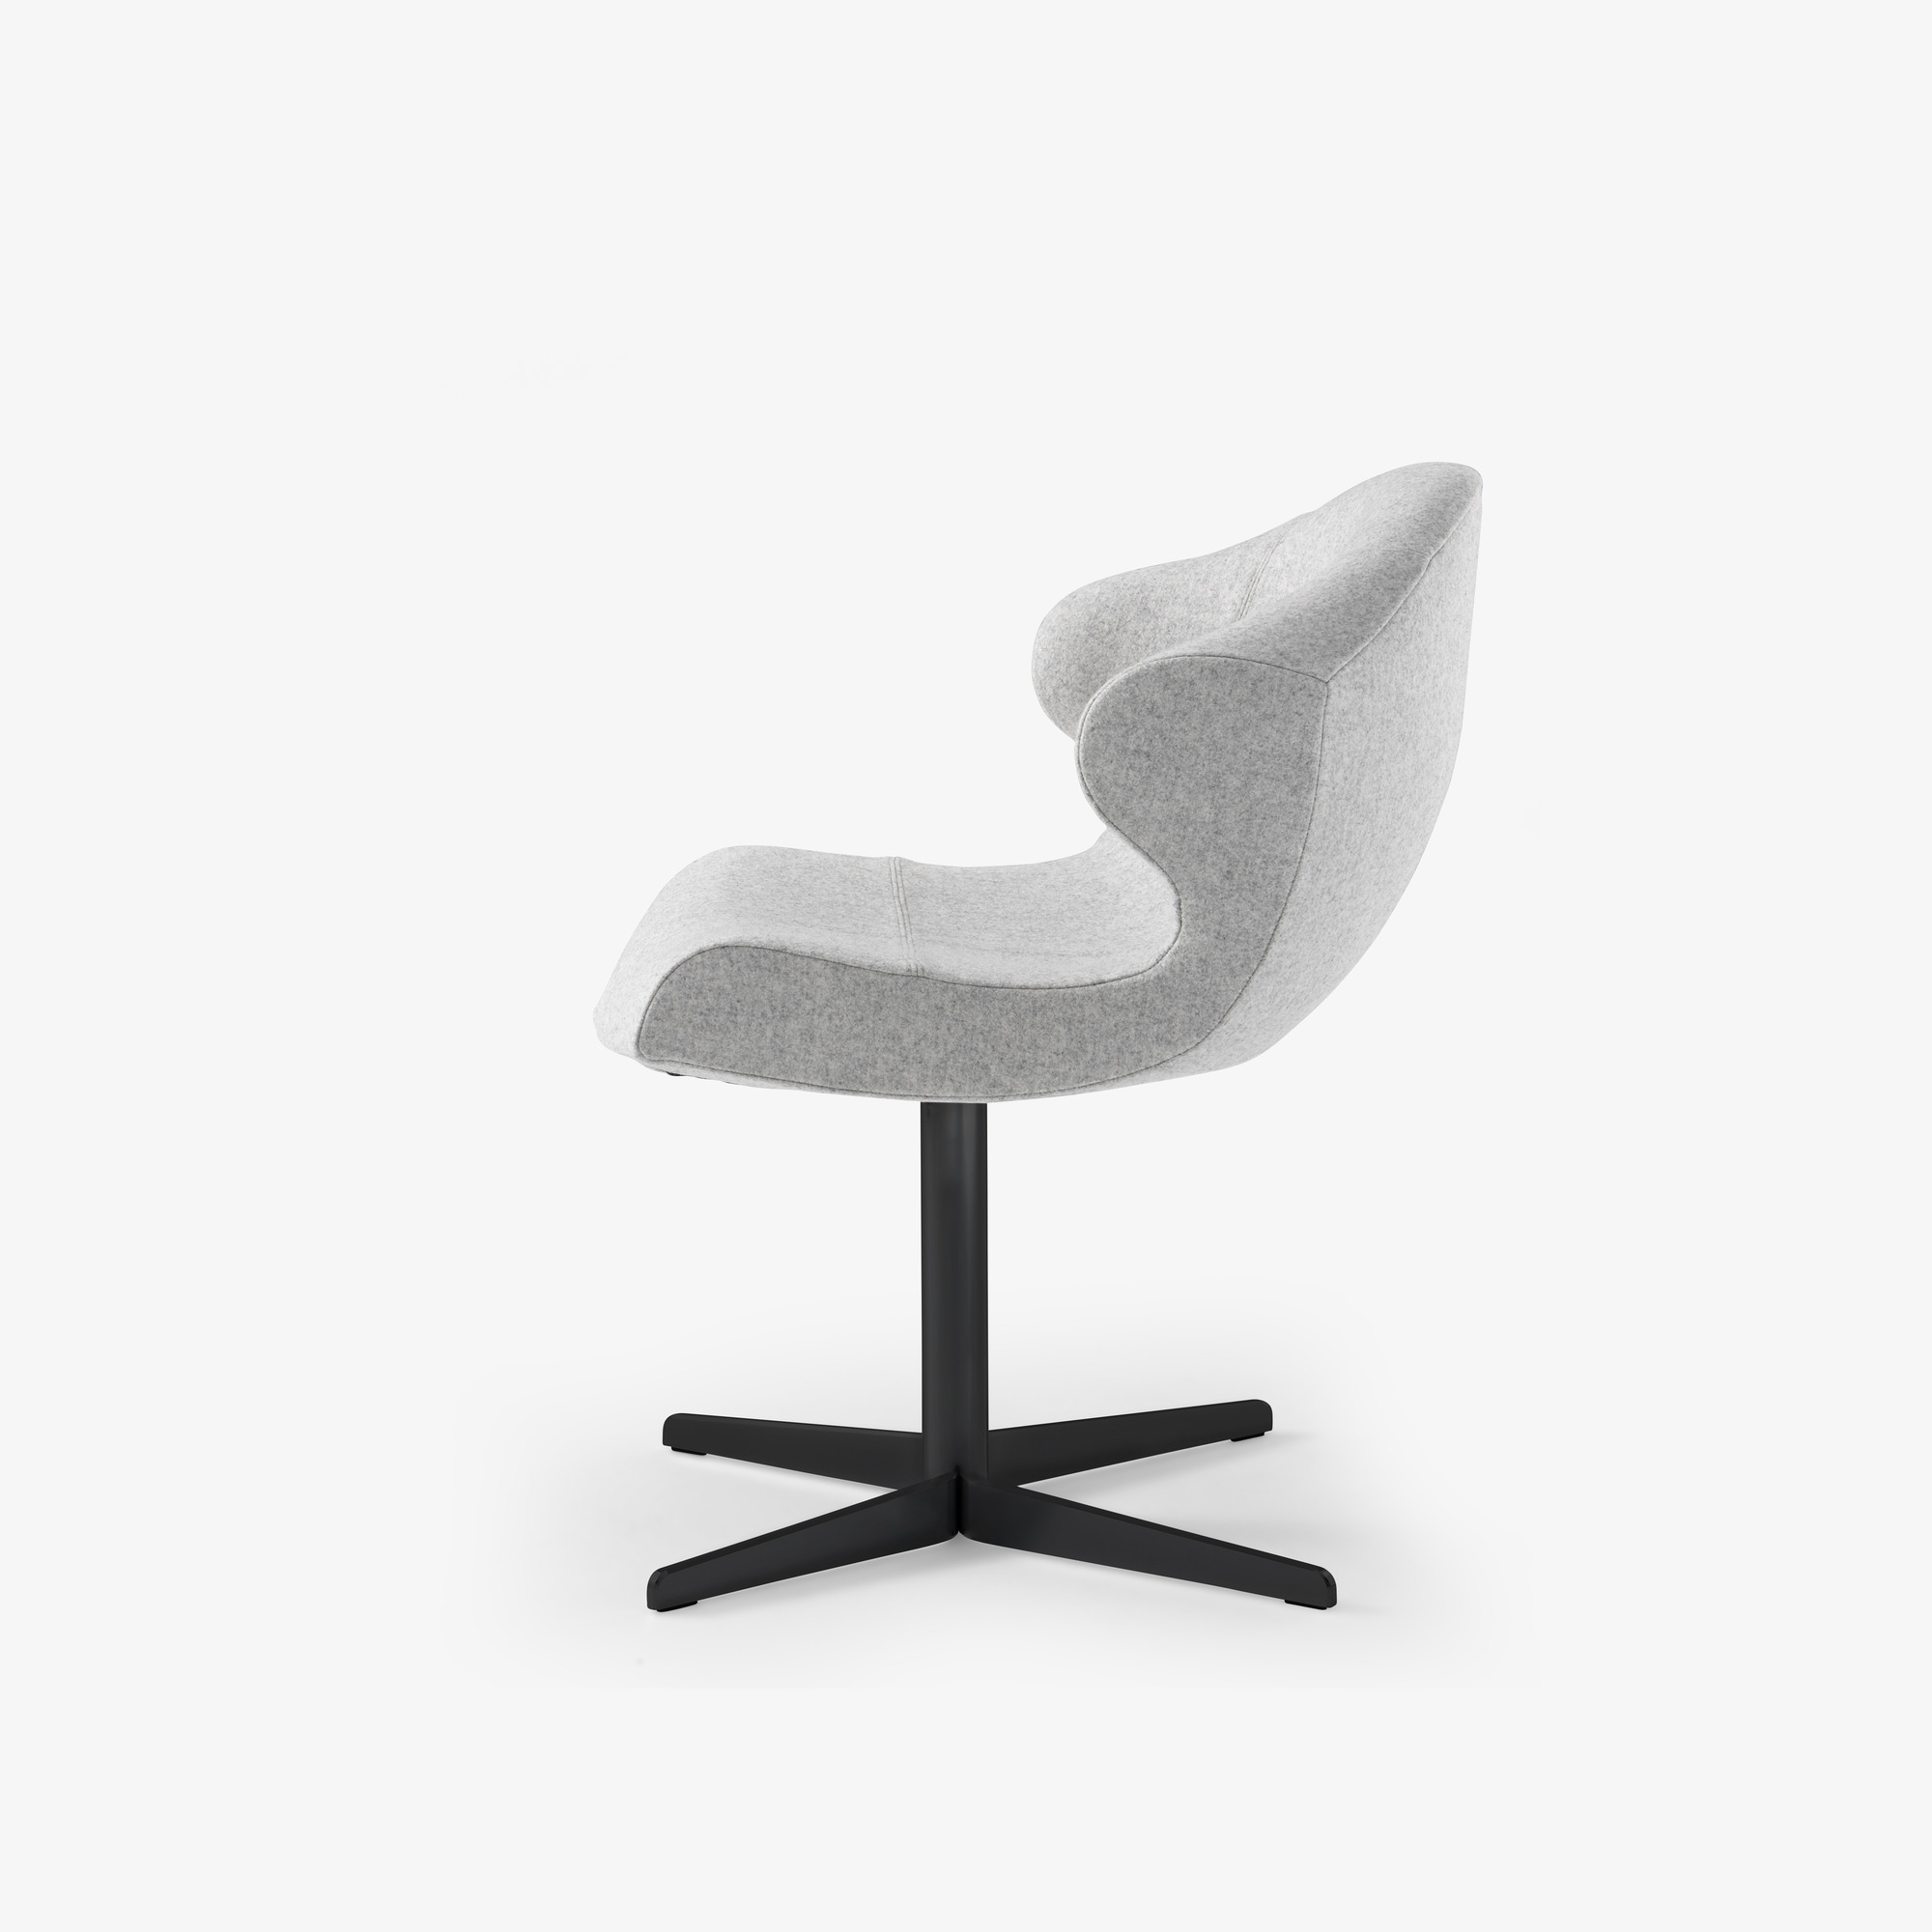 Image Alster chair with arms matt black central pedestal 3